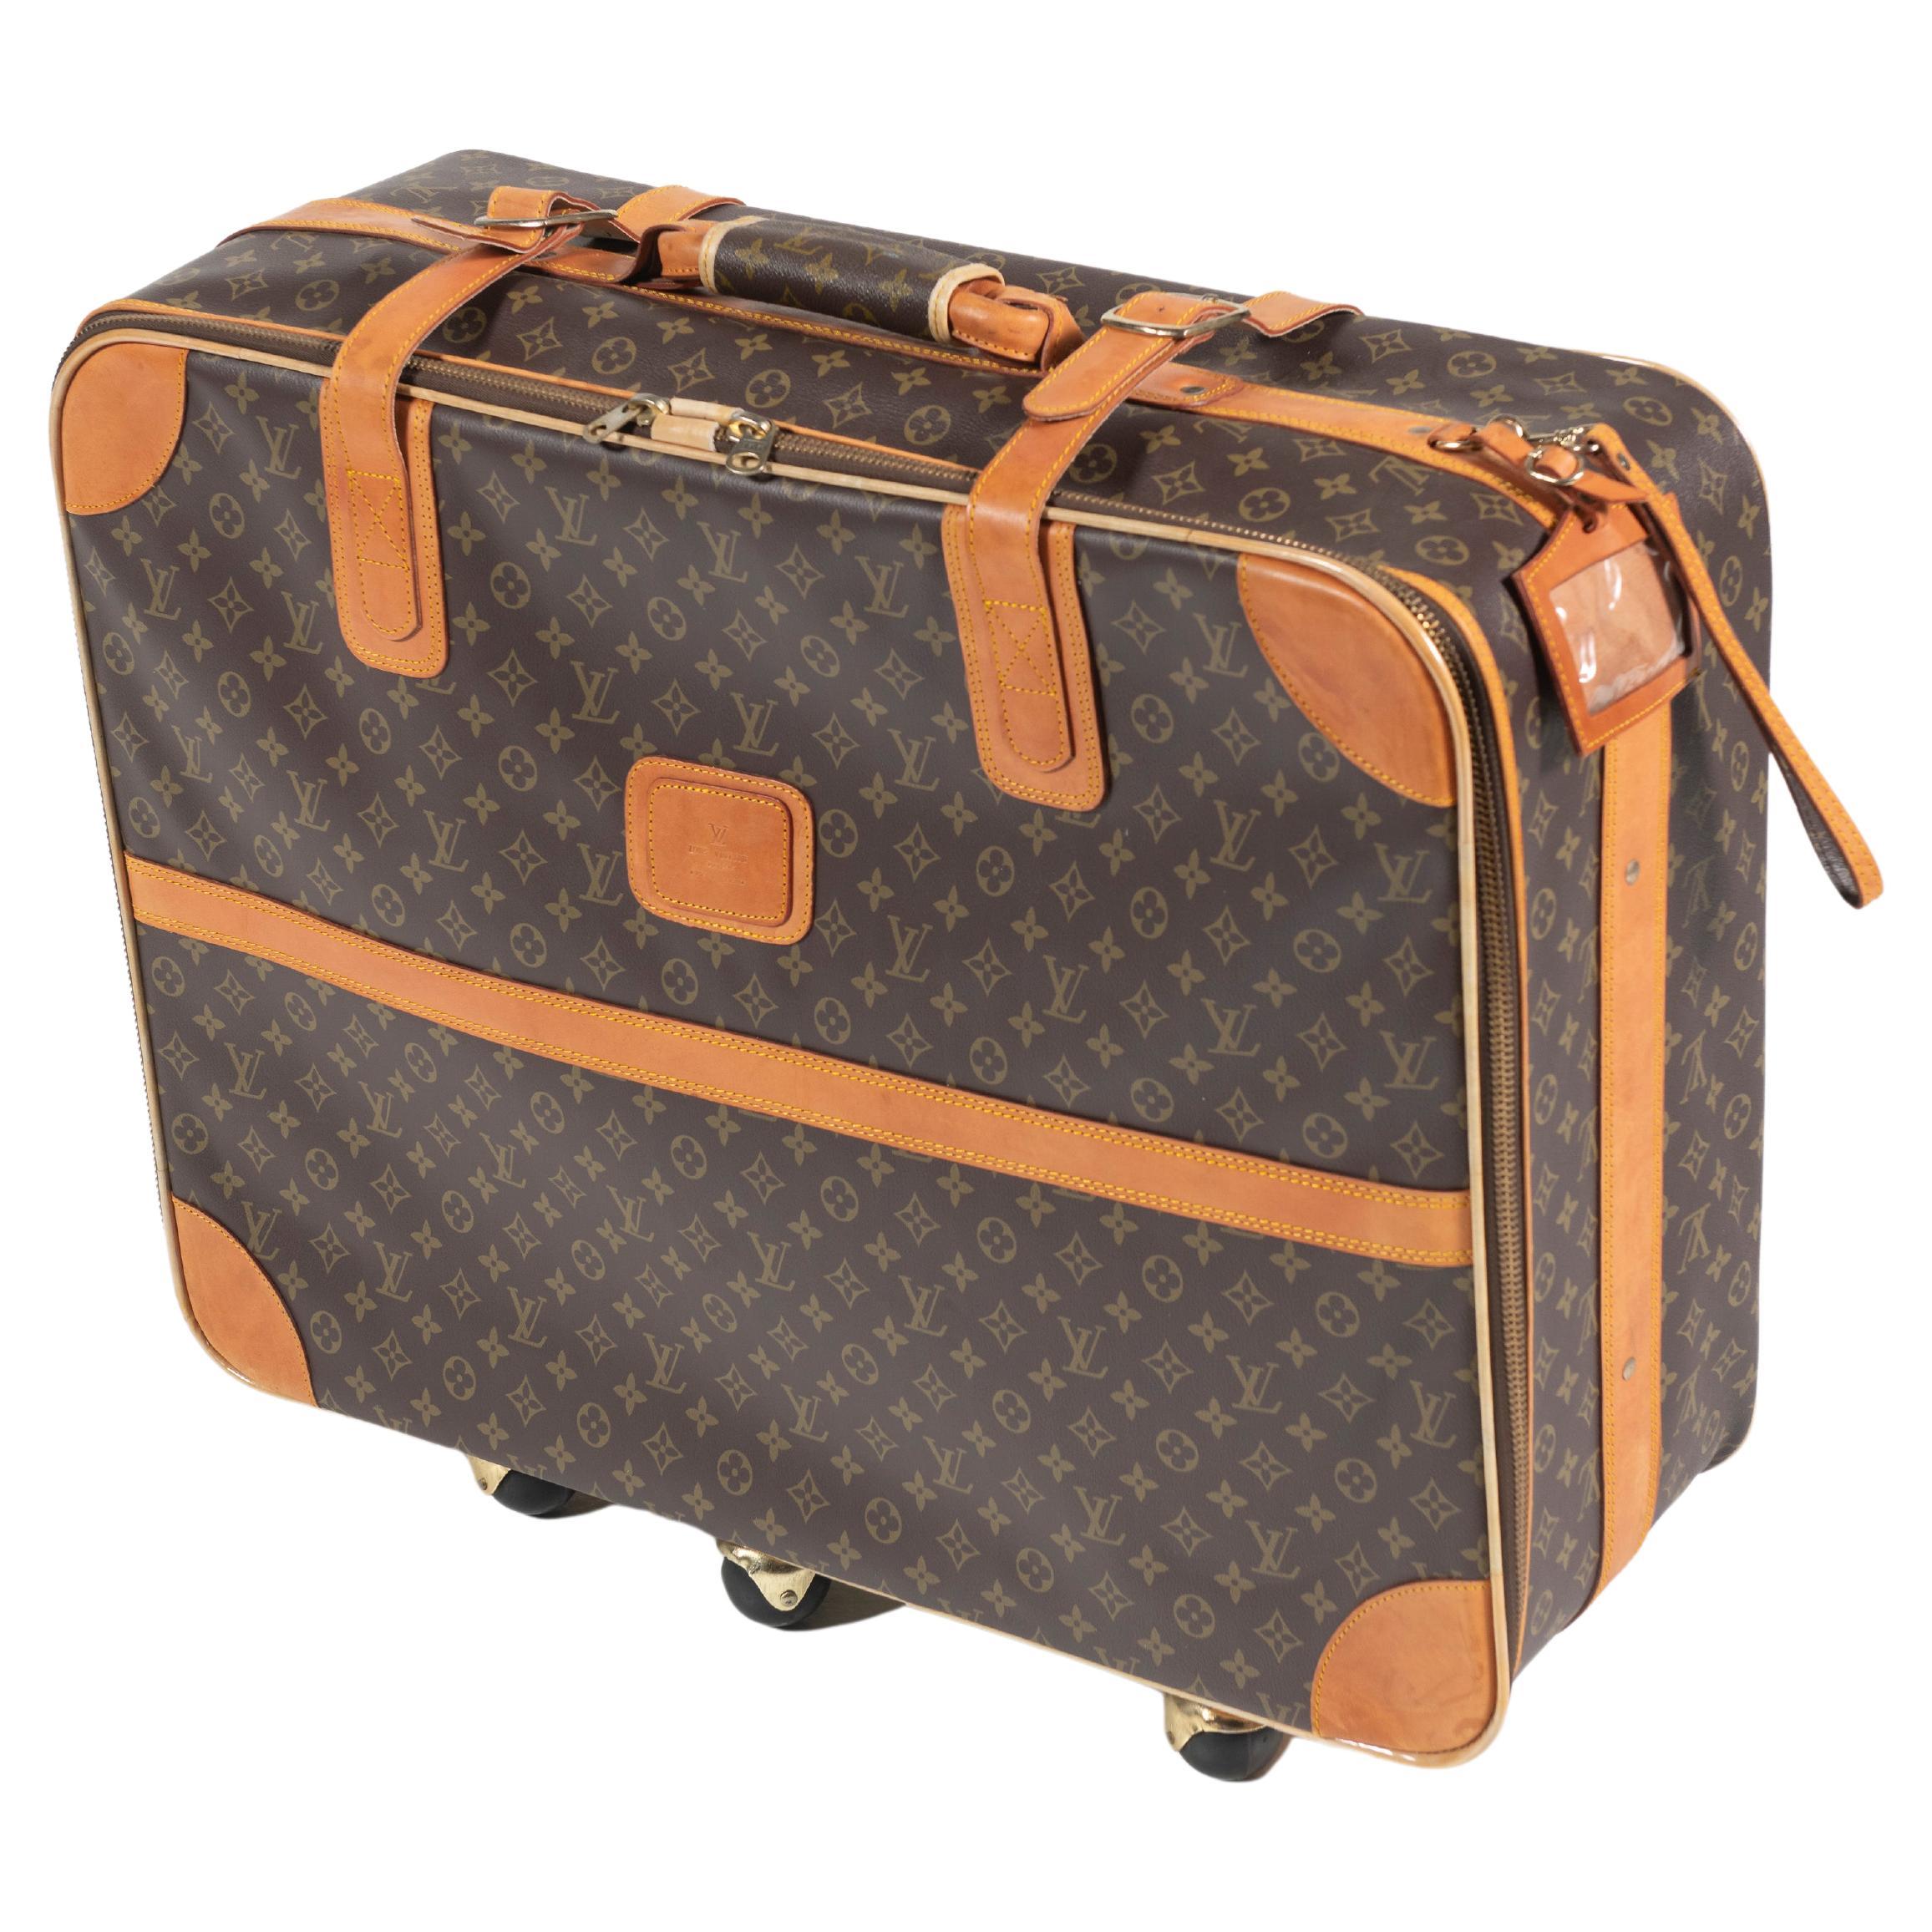 Vintage Louis Vuitton Suitcase, Monogrammed Coated Canvas, Small-Sized For Sale